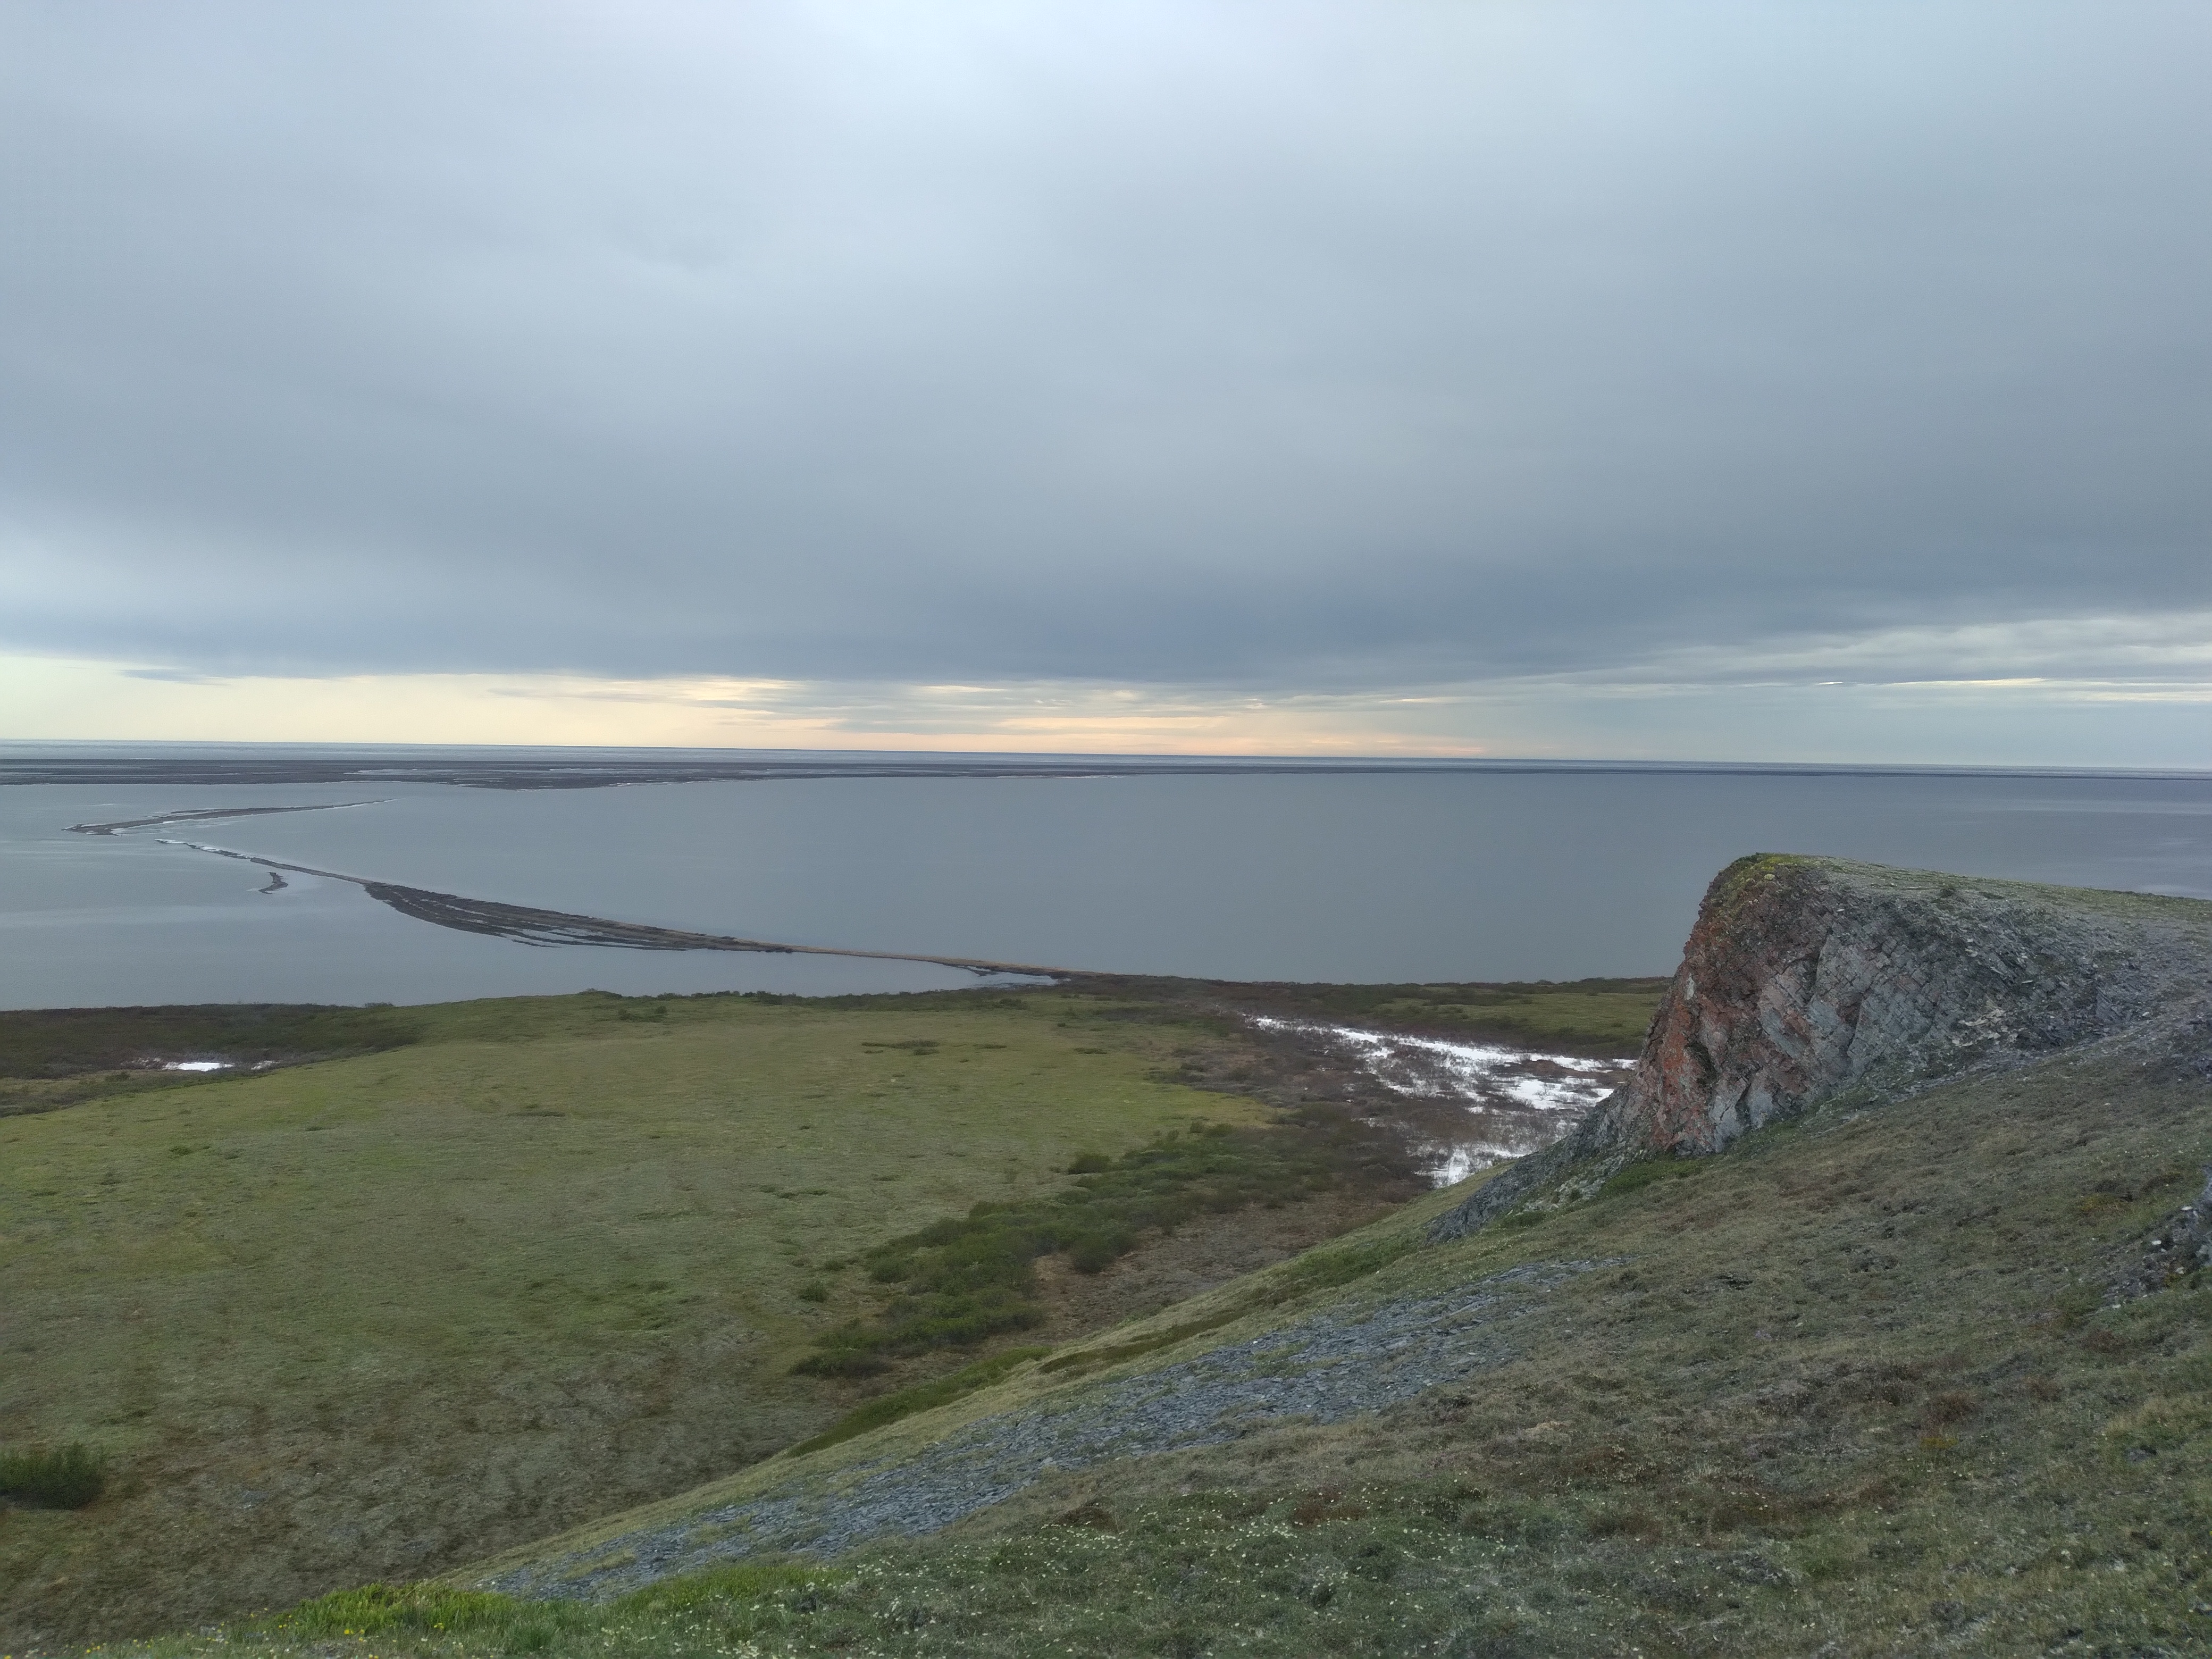 Krusenstern Lagoon lies along the Chukchi Sea coast in Cape Krusenstern National Monument. Fish were sampled from this and other nearby lagoons for PFAS and mercury testing.